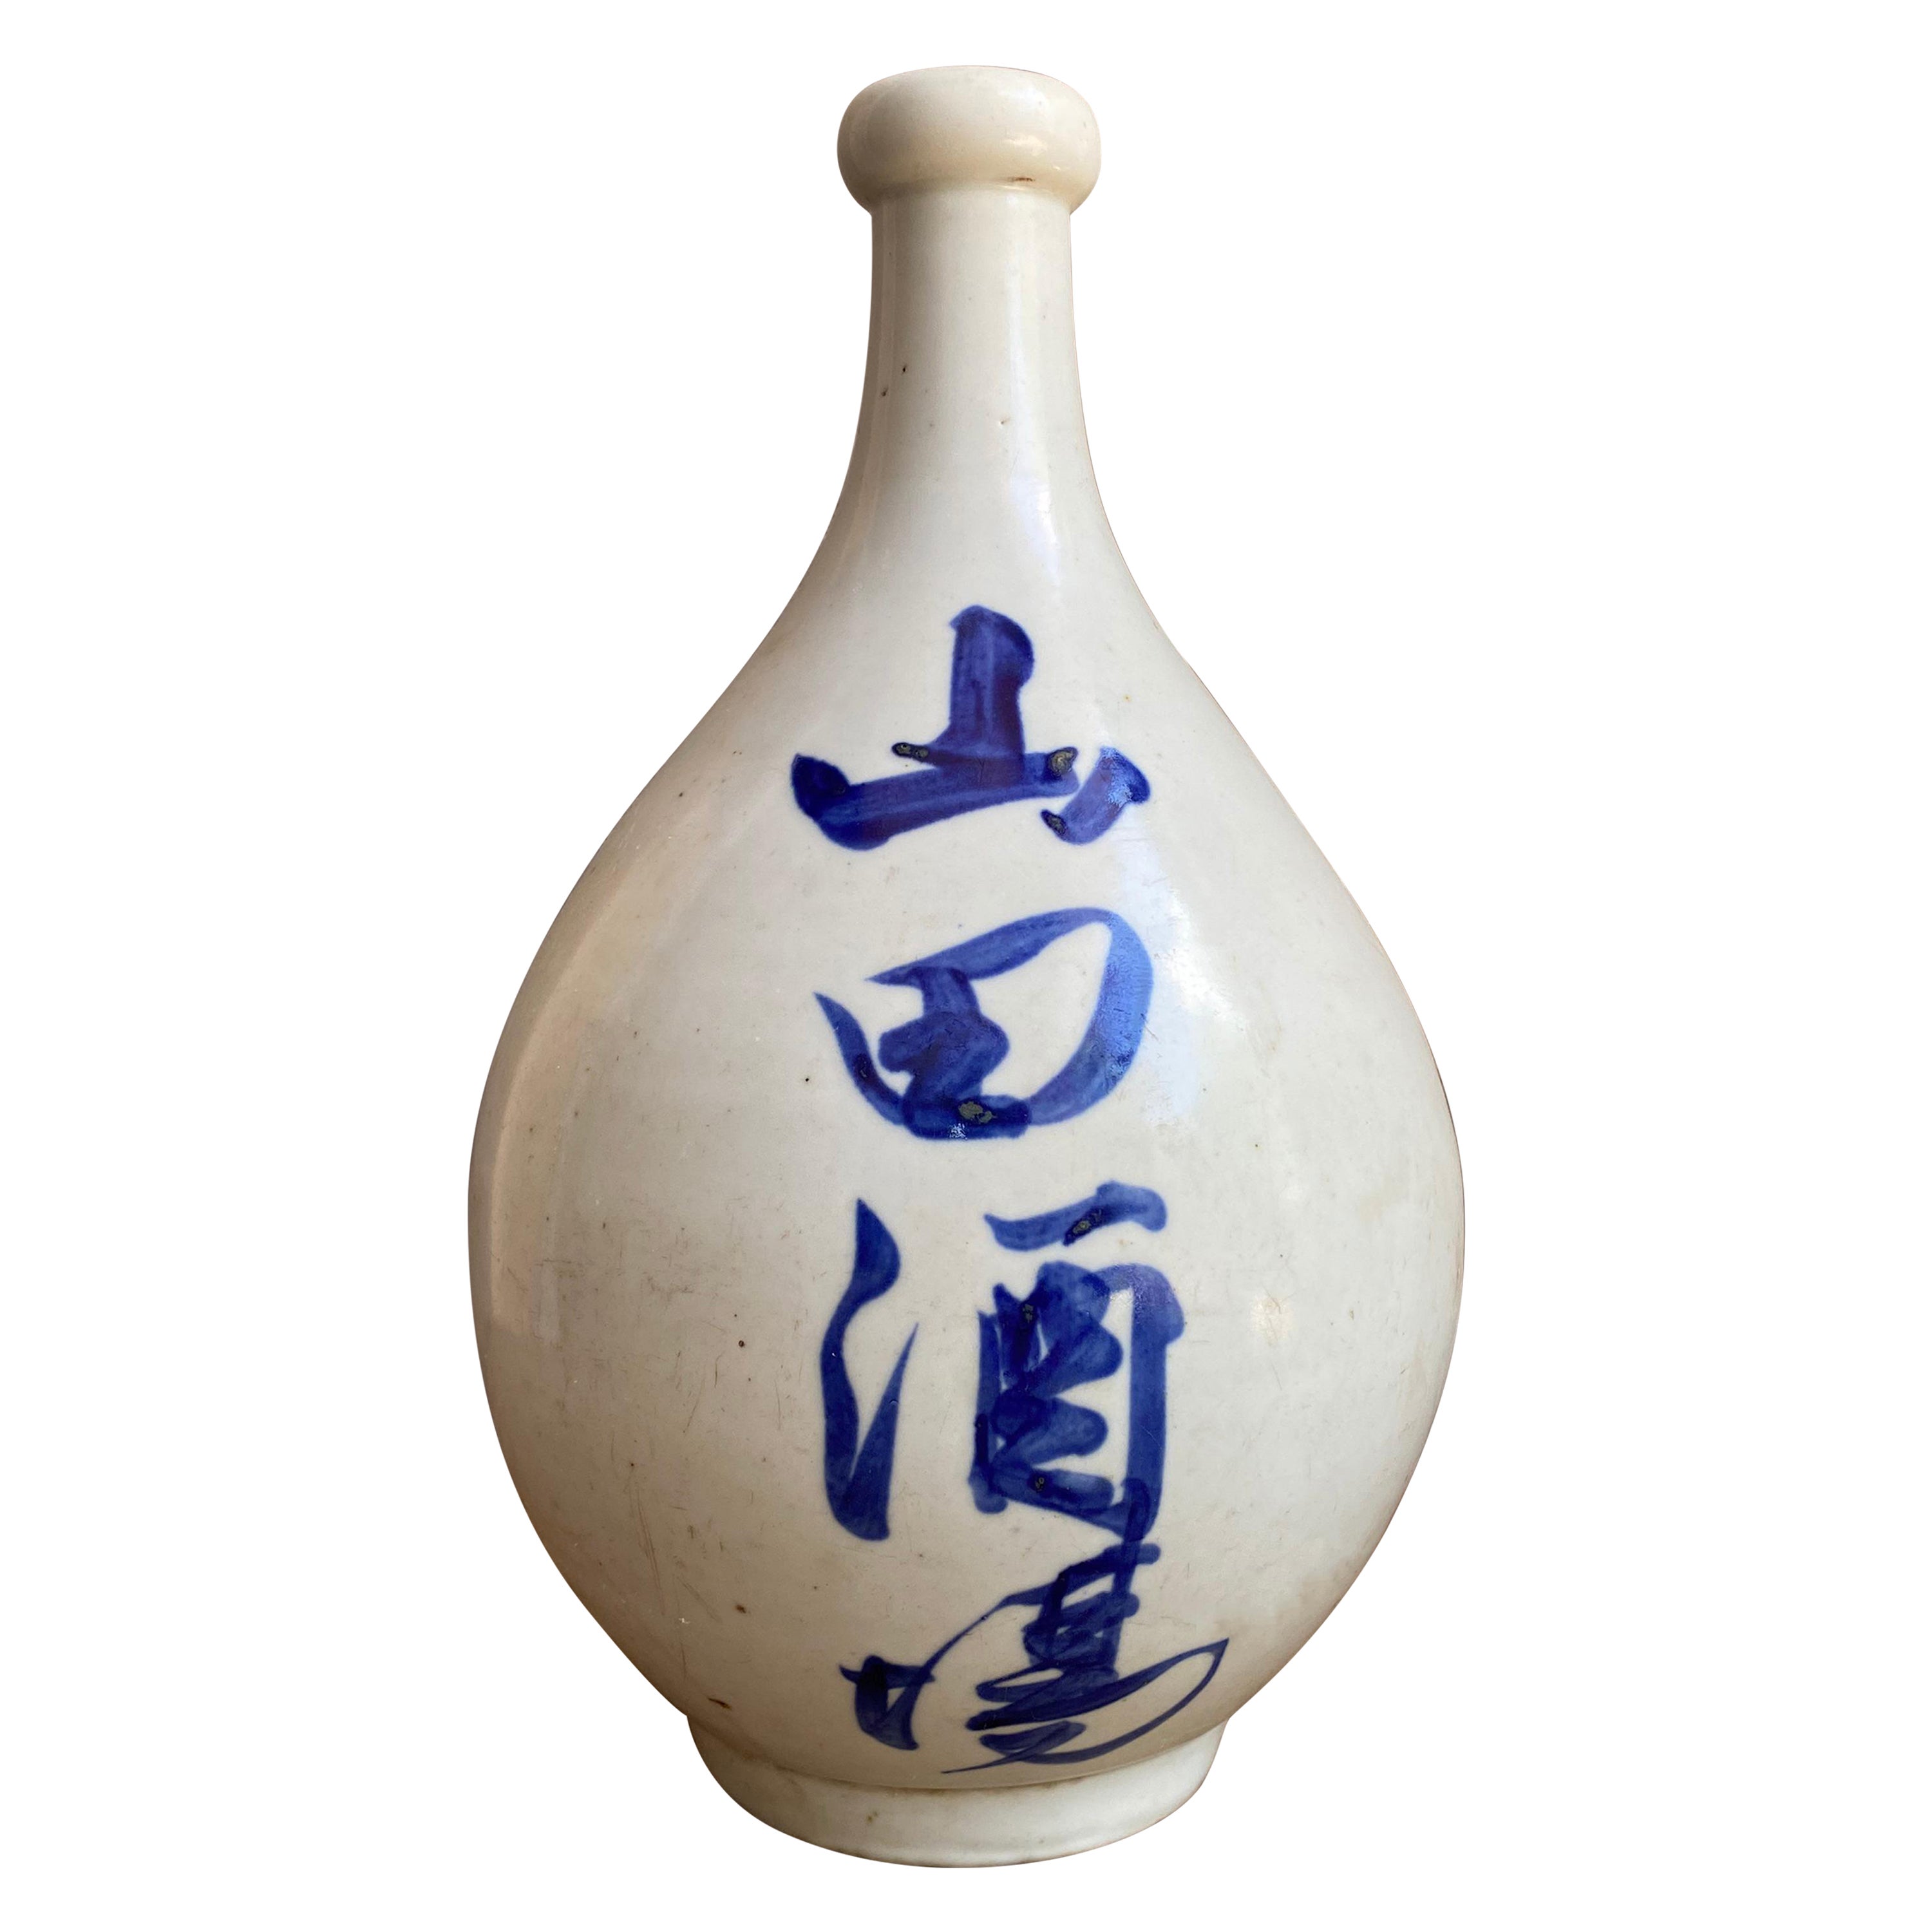 Japanese Ceramic Sake Bottle with Hand-Painted Characters, Early 20th Century For Sale